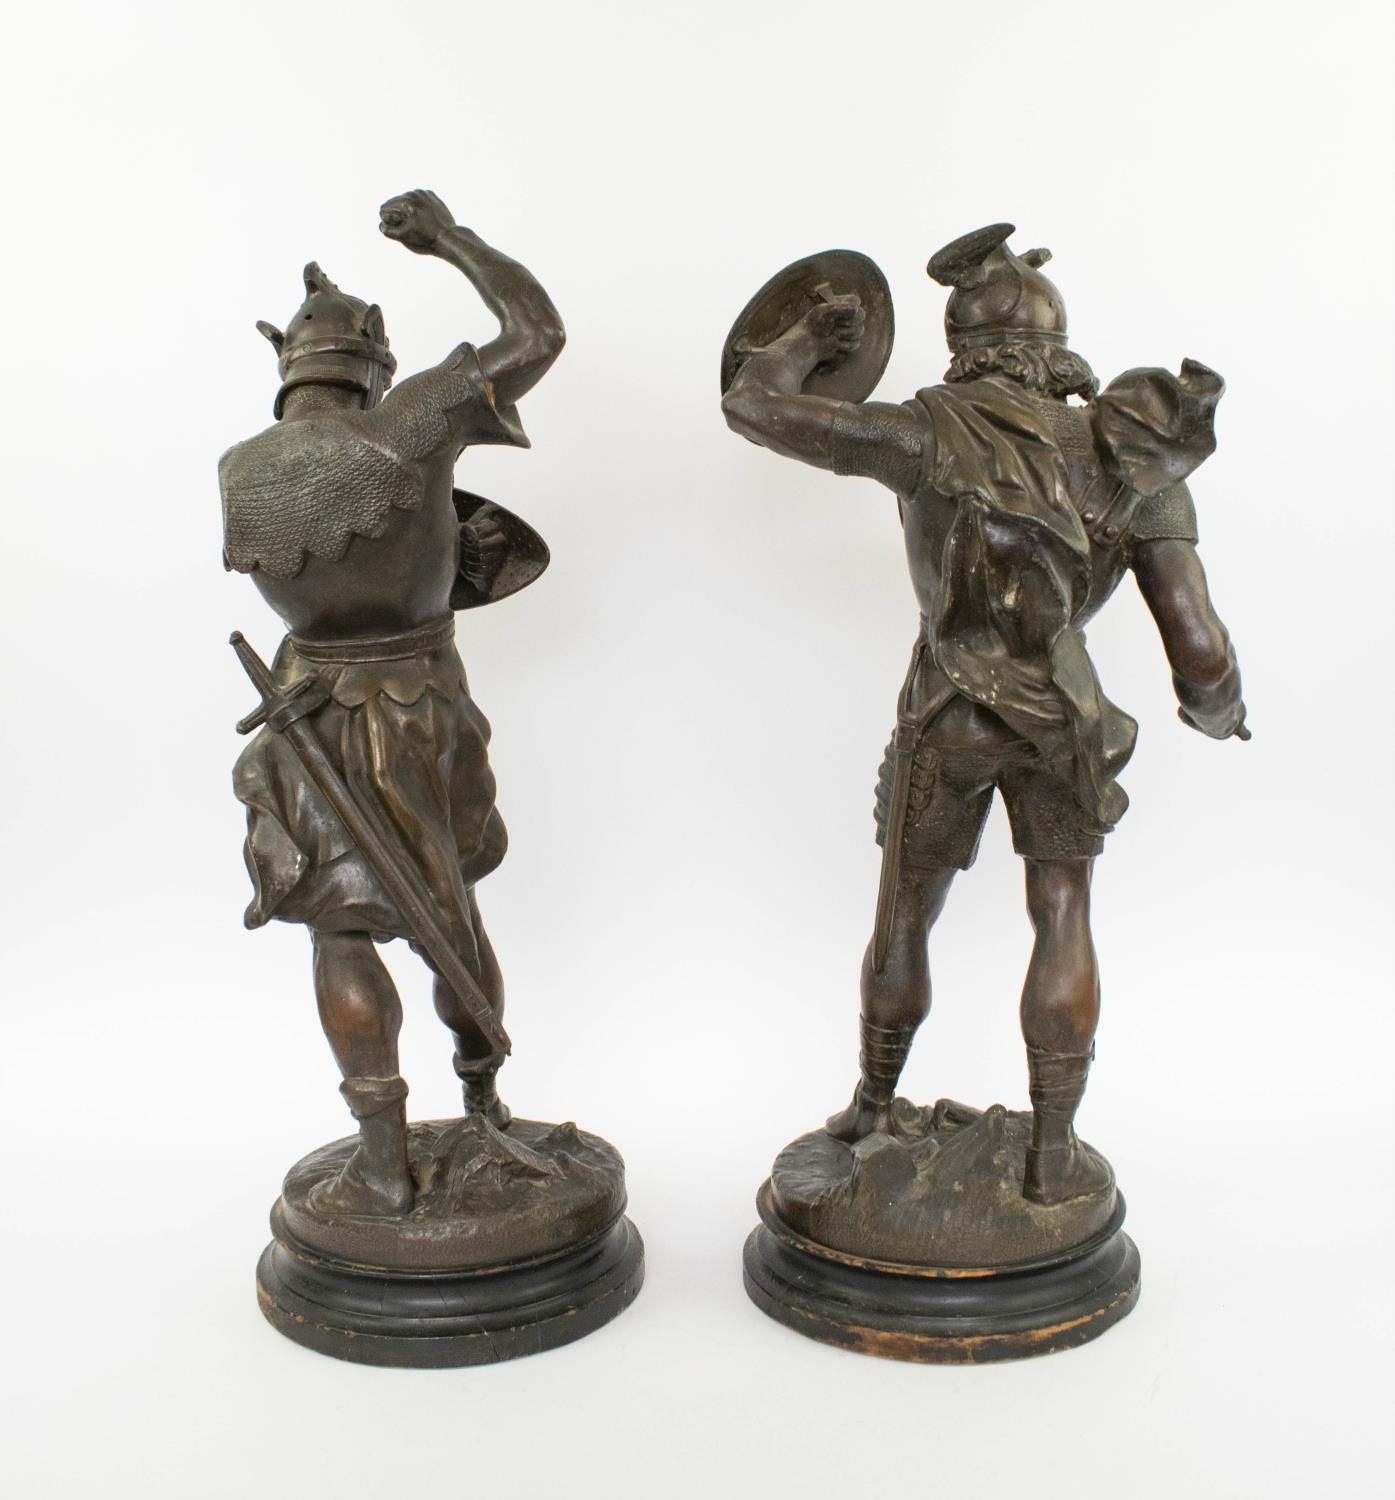 PIERRE-LOUIS DETRIER (French, 1822-1897) 'Warriors', a pair of bronze statues, inscribed 'Detrier' - Image 9 of 9